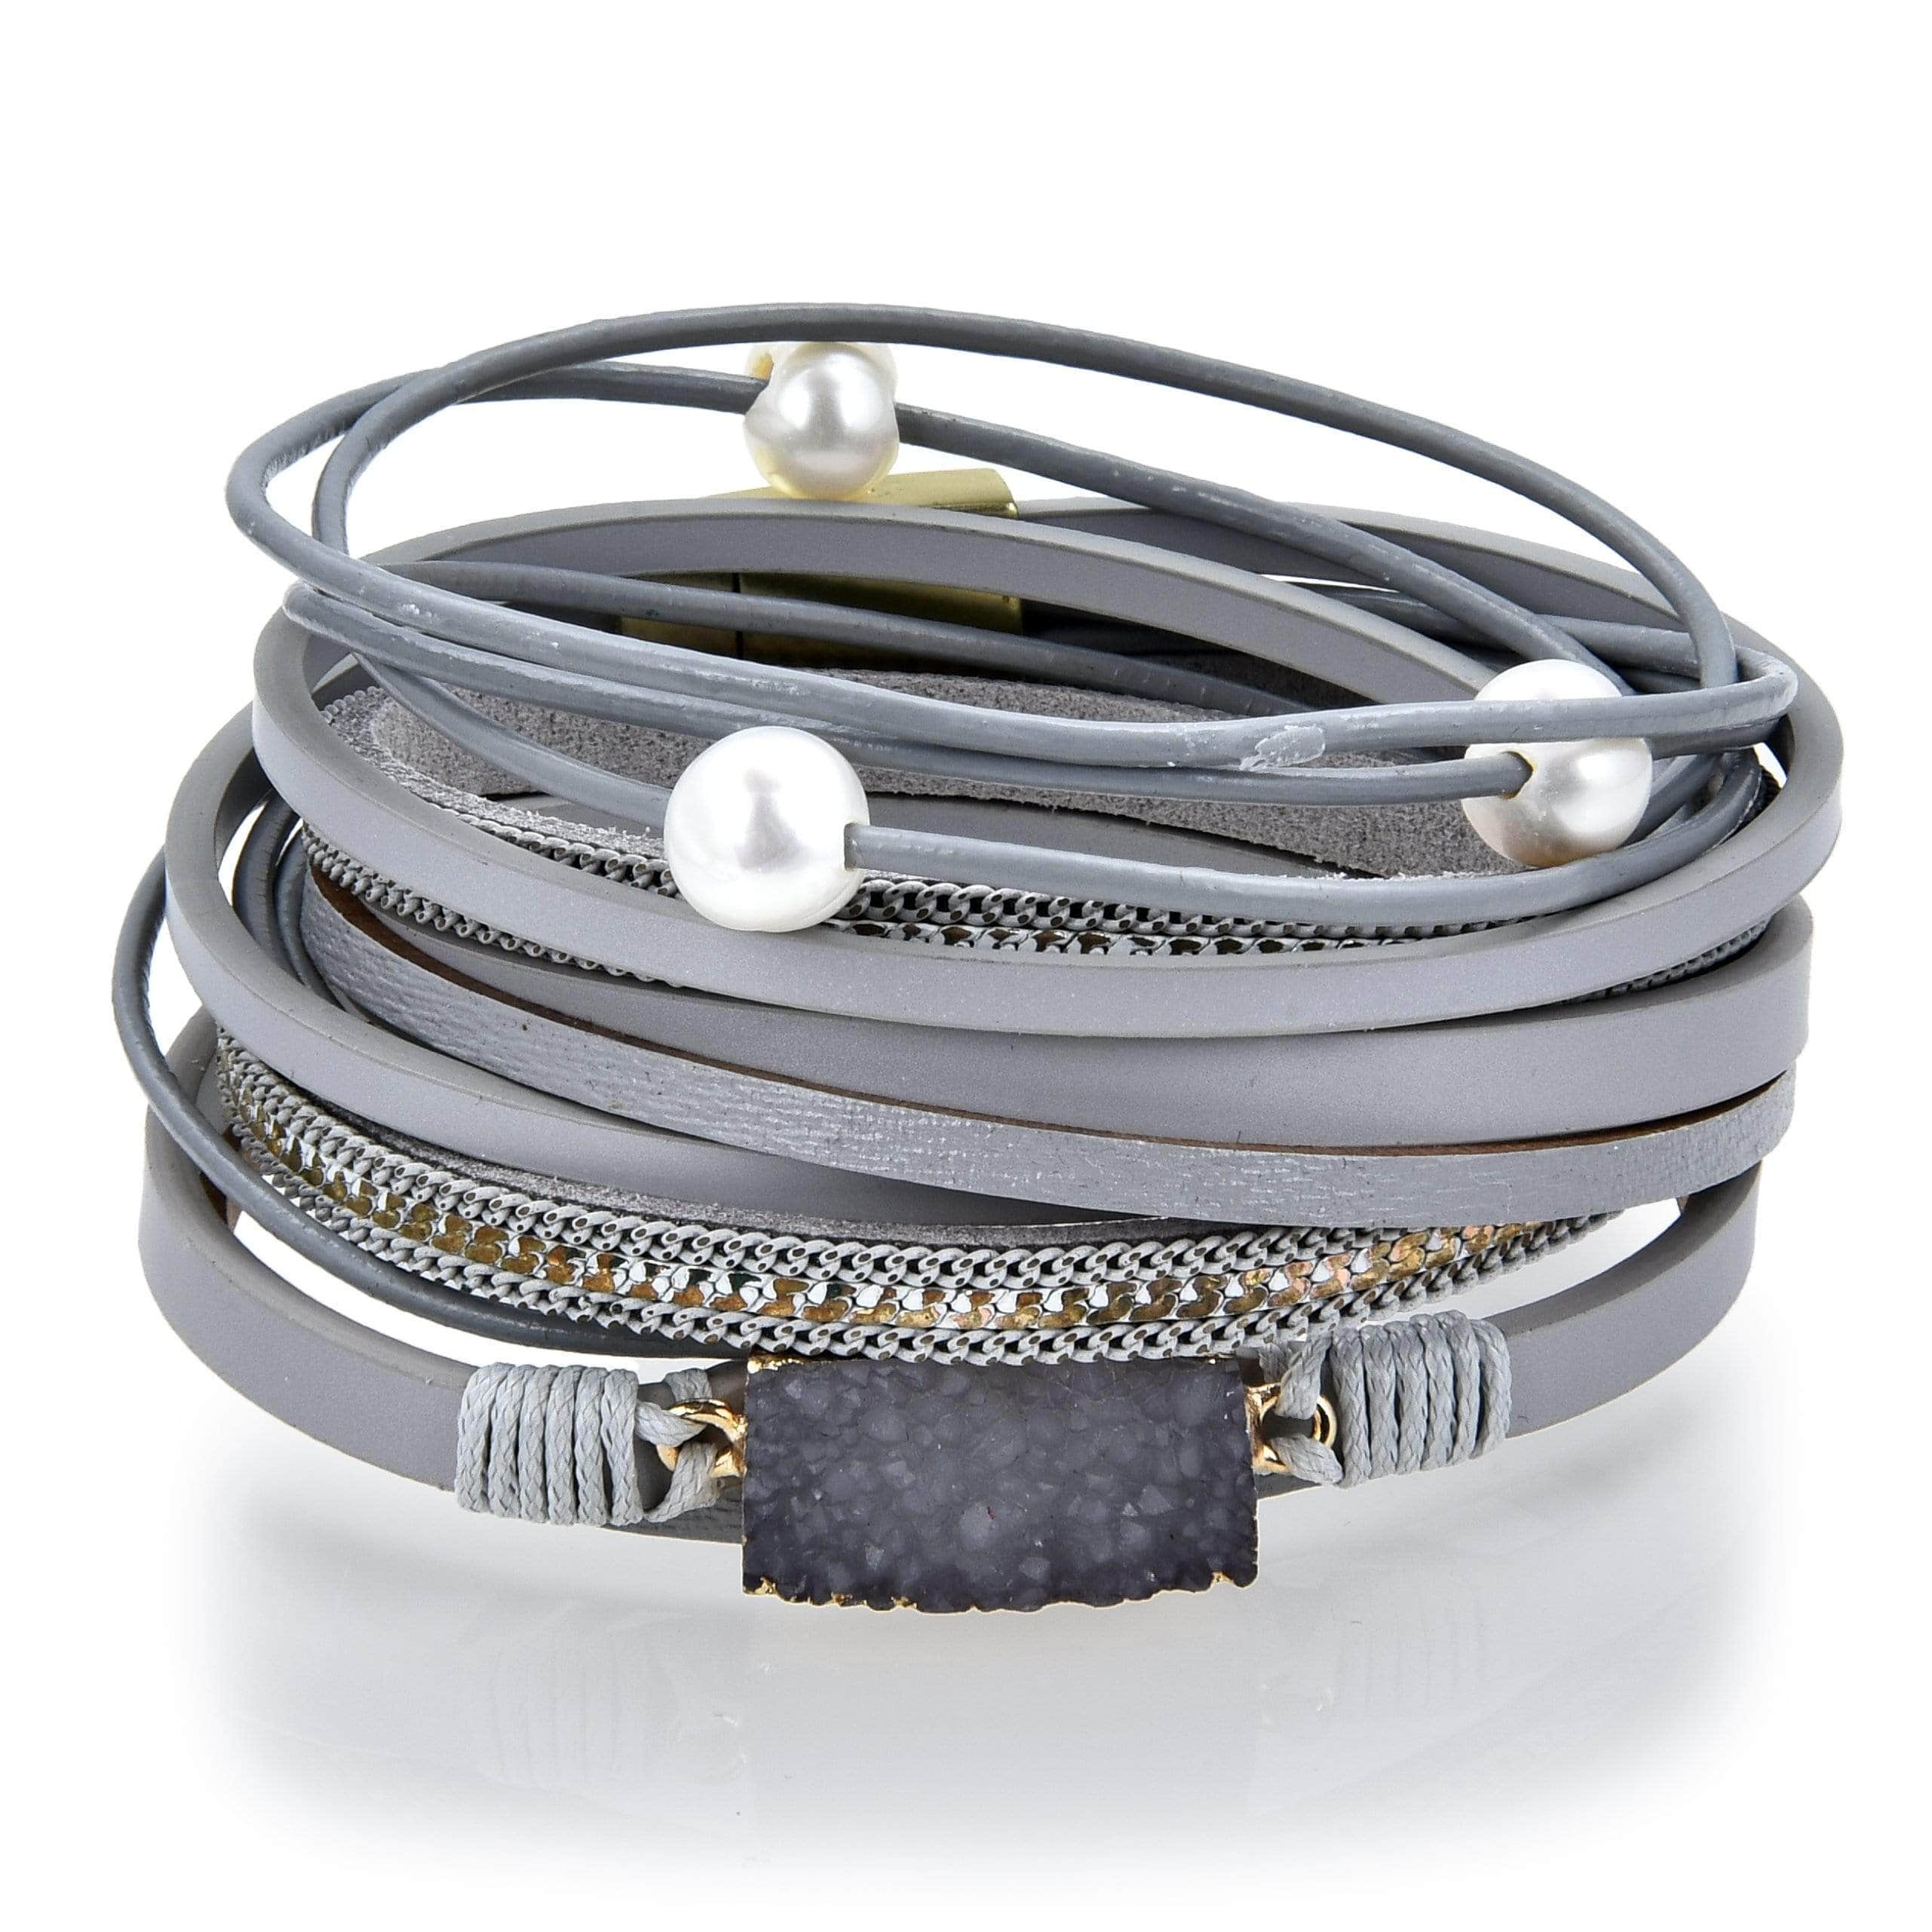 Kalifano Multiwrap Bracelets Multiple Strand Geode Gray Bracelet with Magnetic Clasp BMW-24-GY